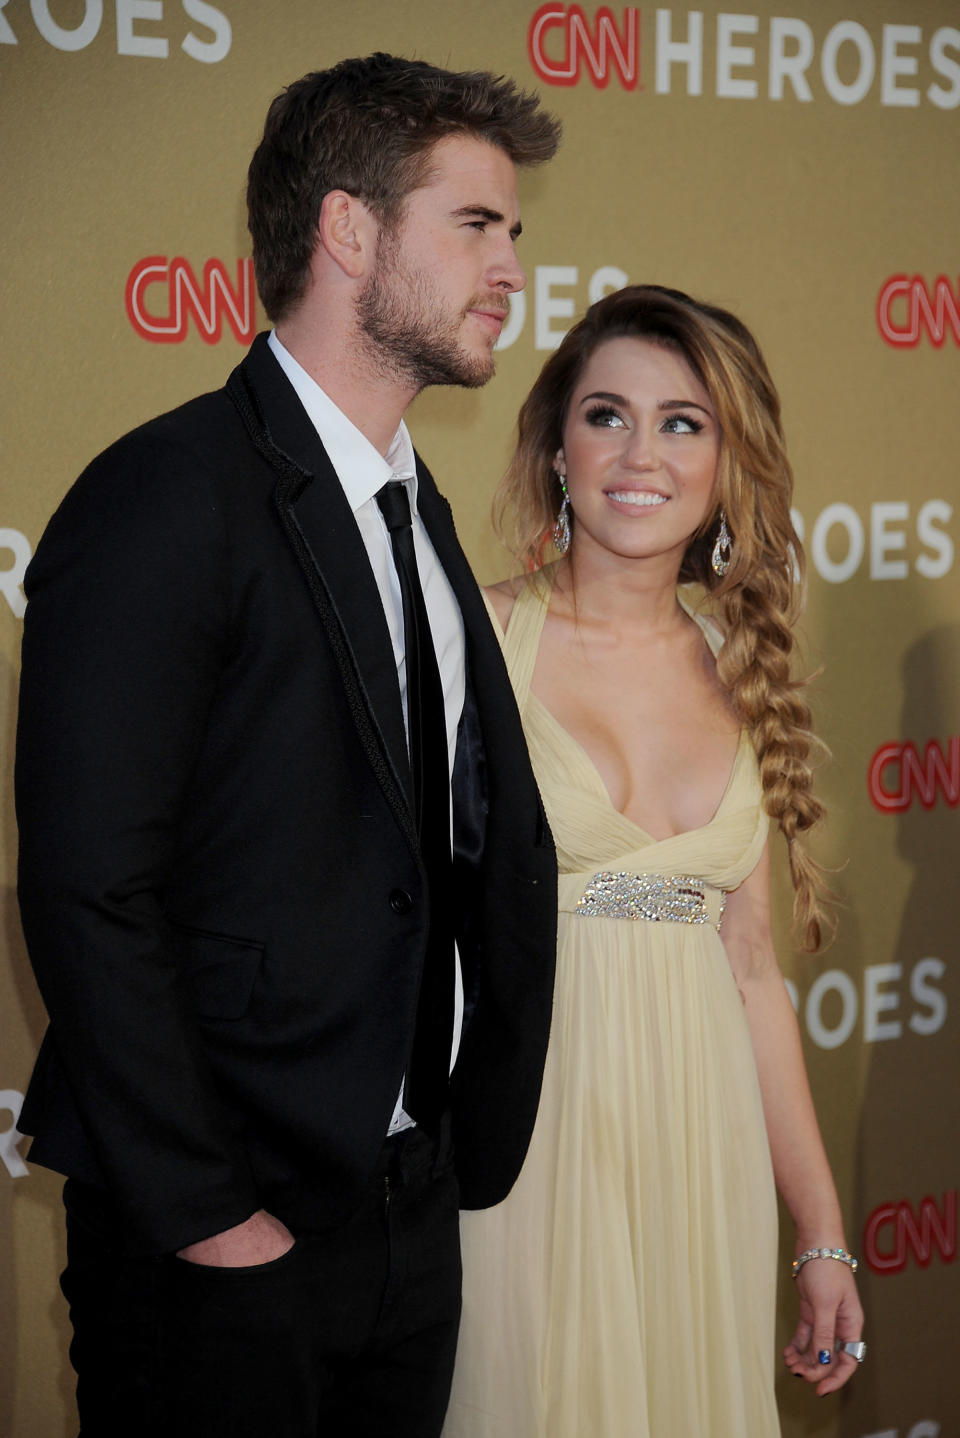 Actor Liam Hemsworth and actress/singer Miley Cyrus arrive at the 2011 CNN Heroes All-Star Tribute at The Shrine Auditorium on Dec. 11, 2011 in Los Angeles, California.&nbsp;